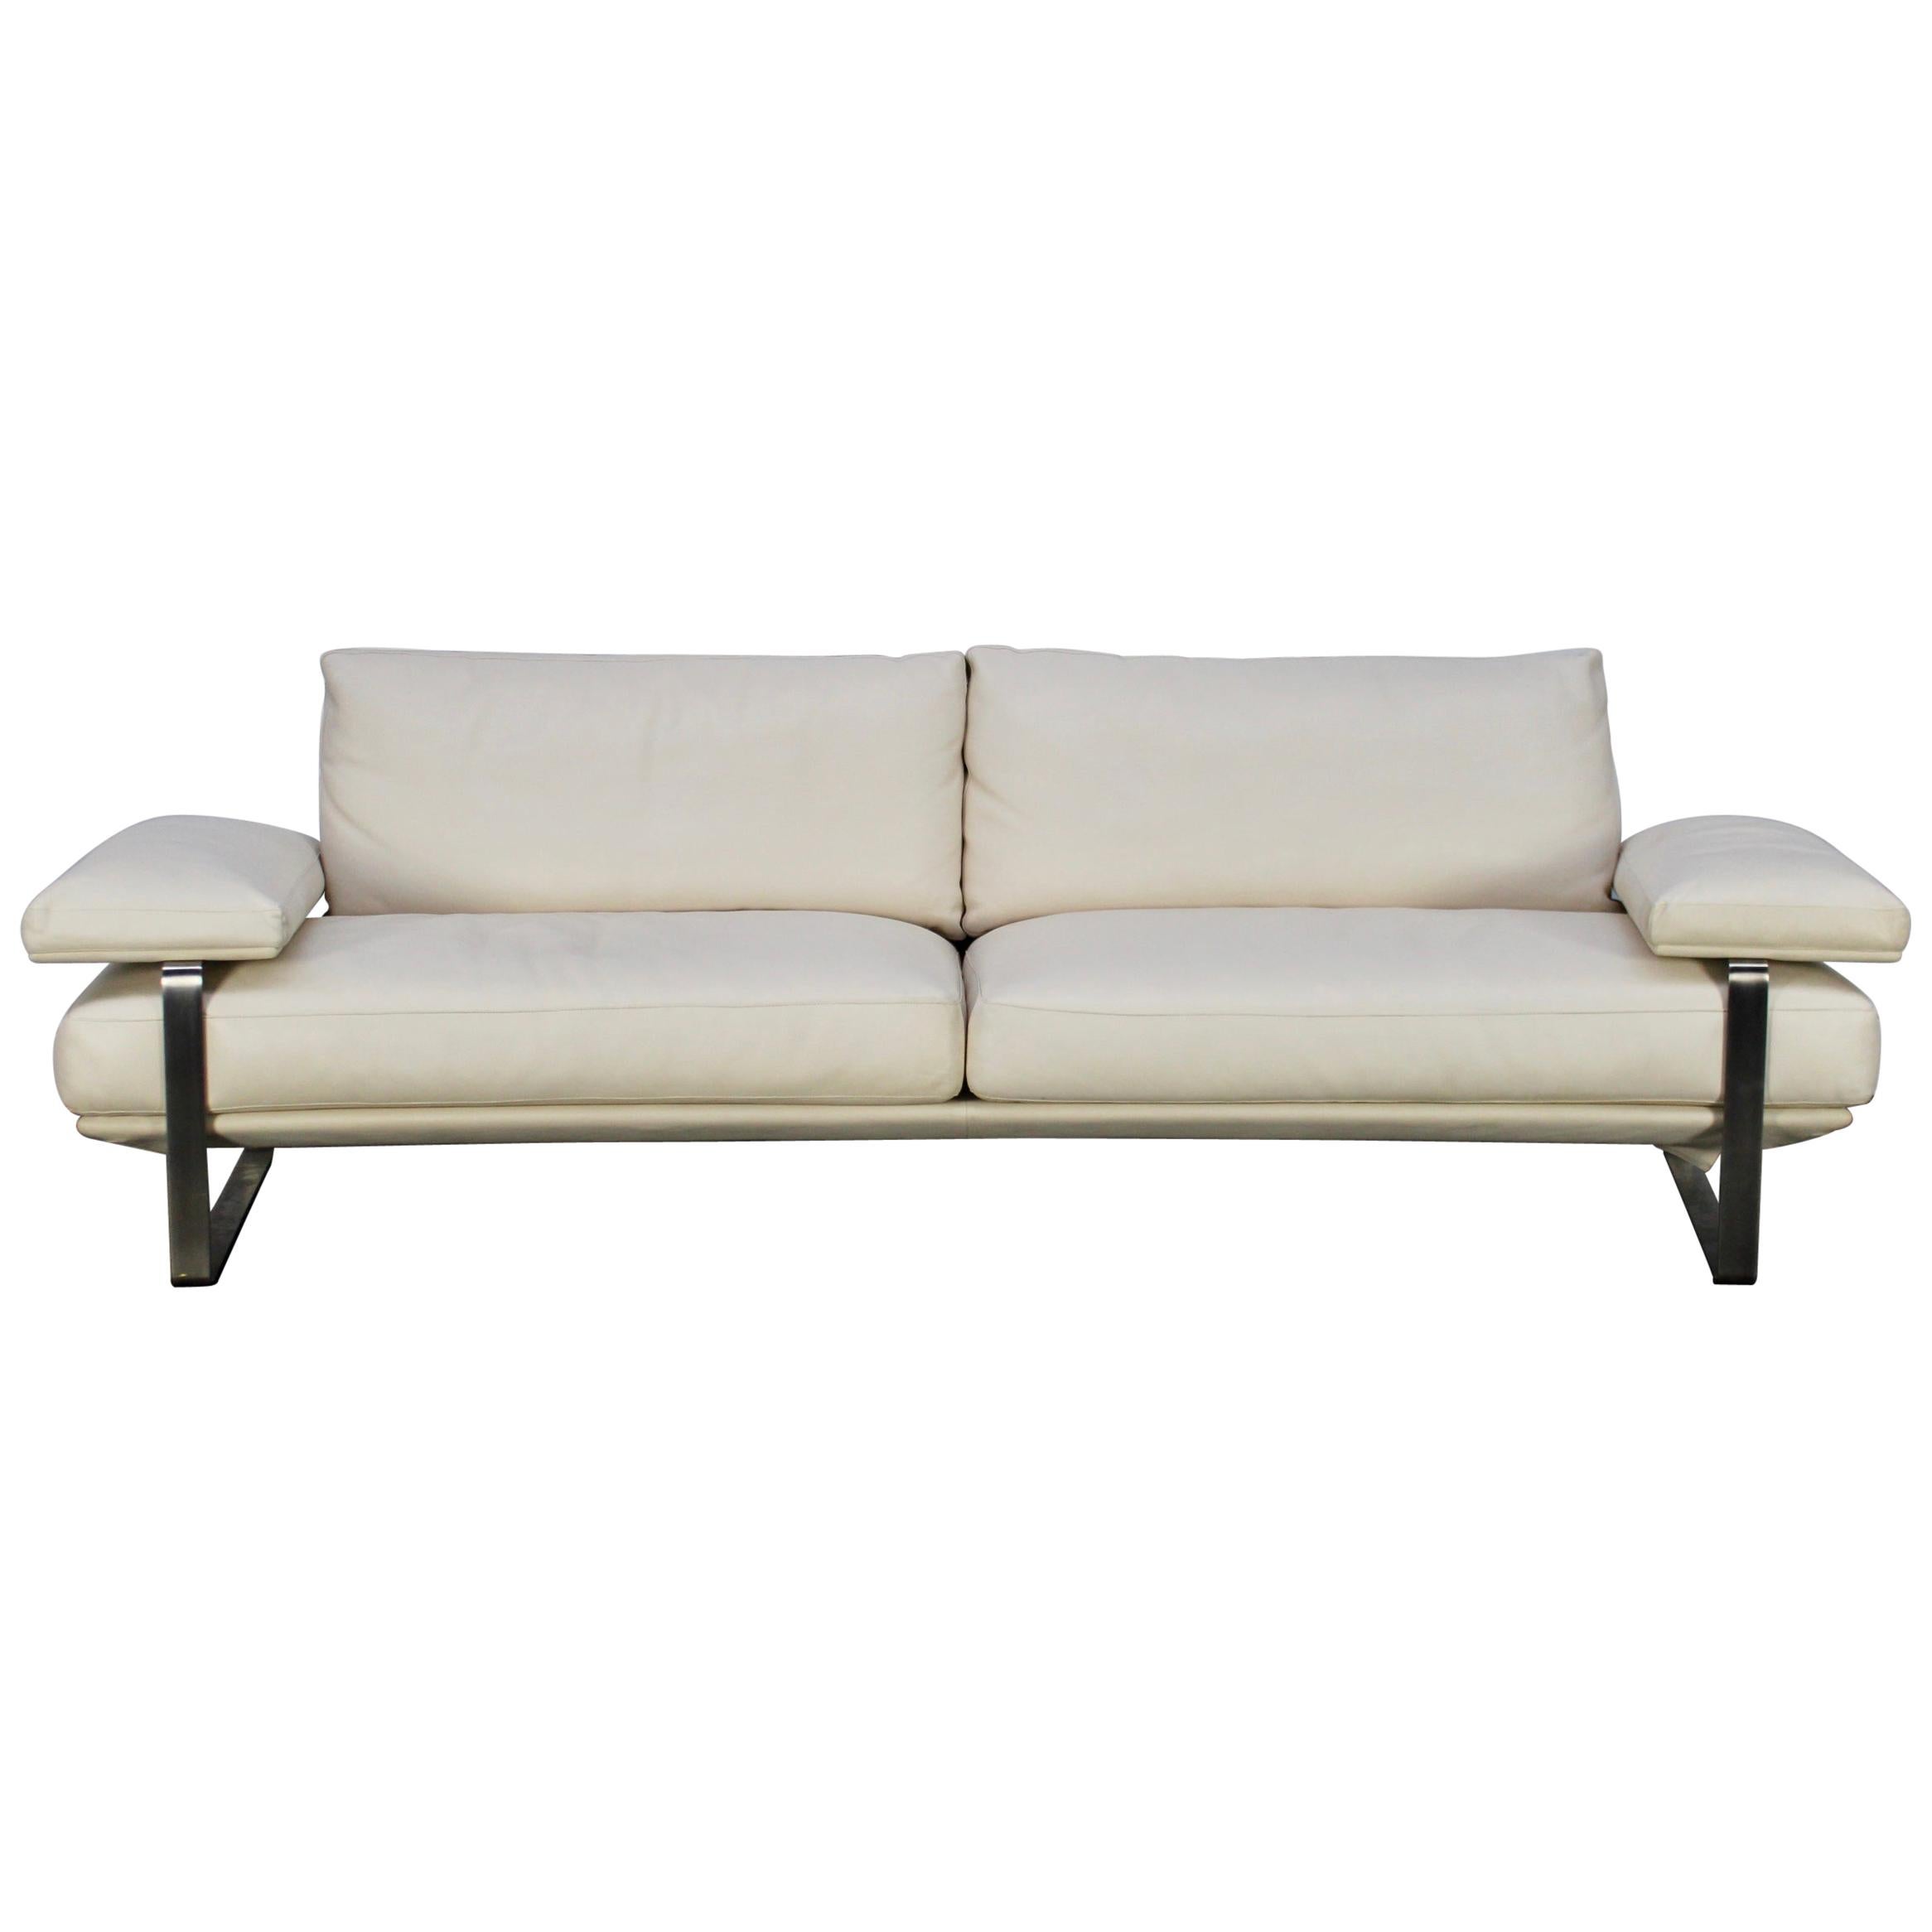 Molteni & C “Still SDC250” Curved Sofa in Ivory Leather